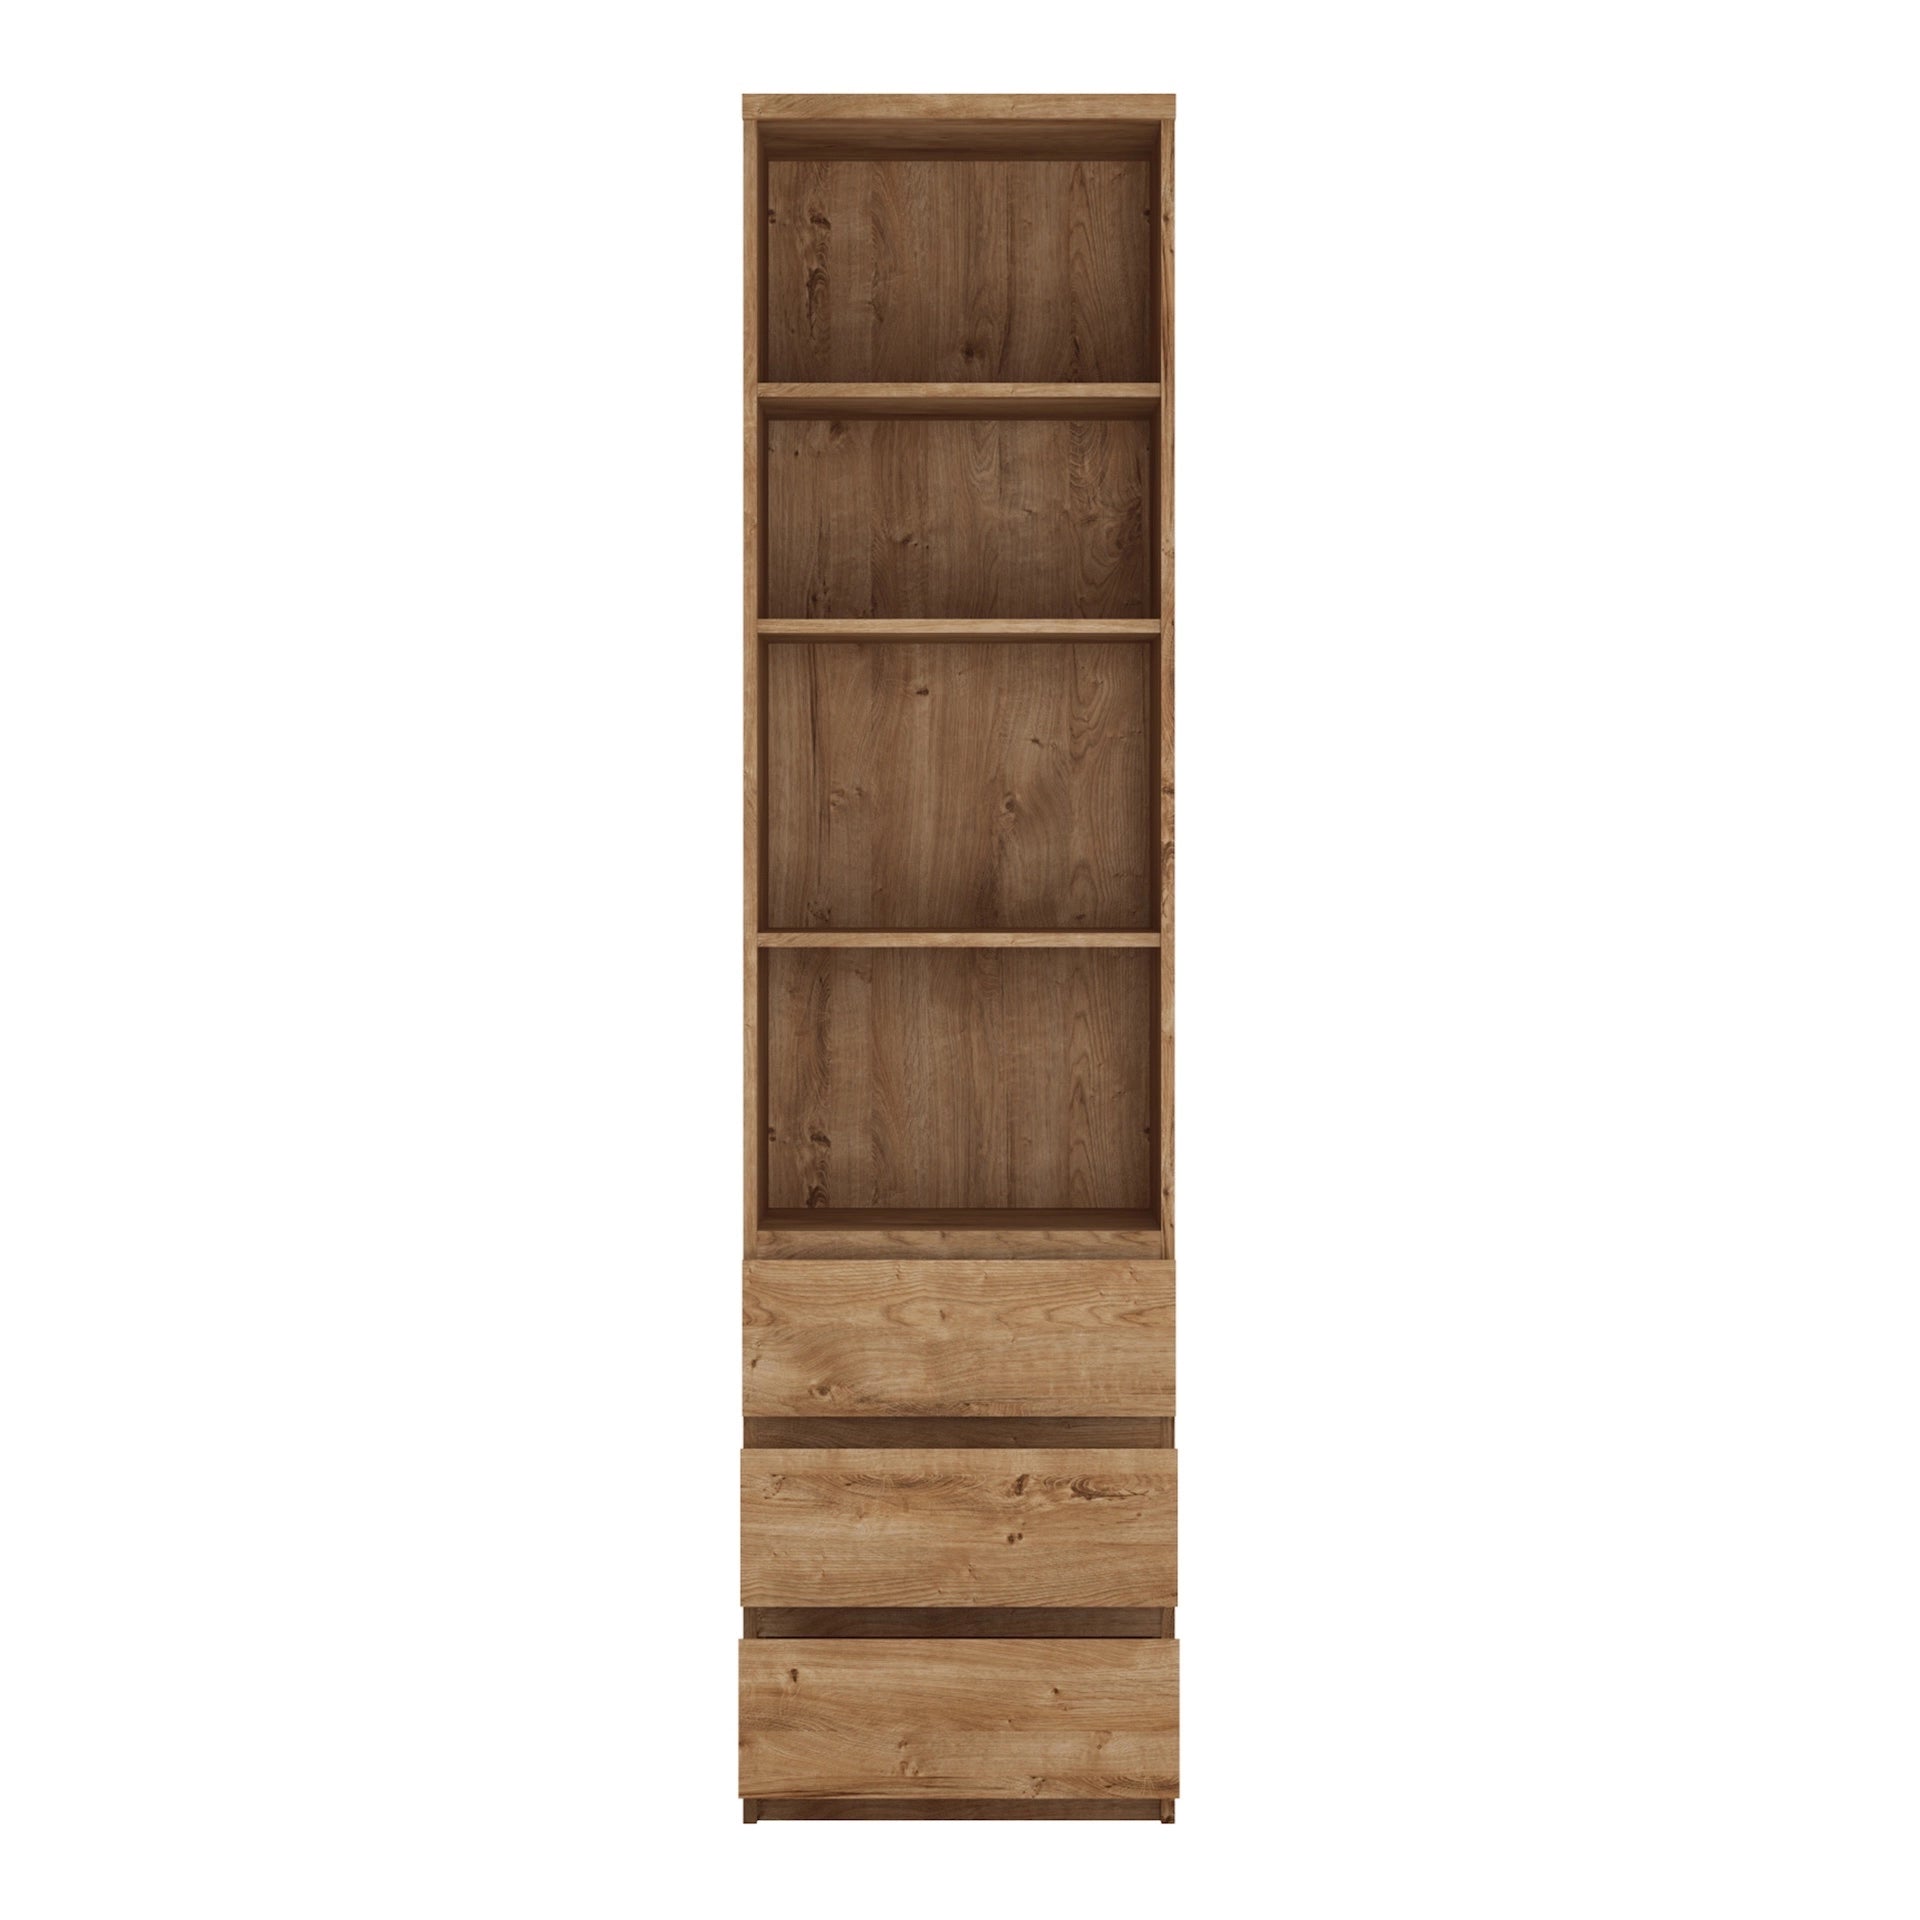 Furniture To Go Fribo Tall Narrow 3 Drawer Bookcase in Oak